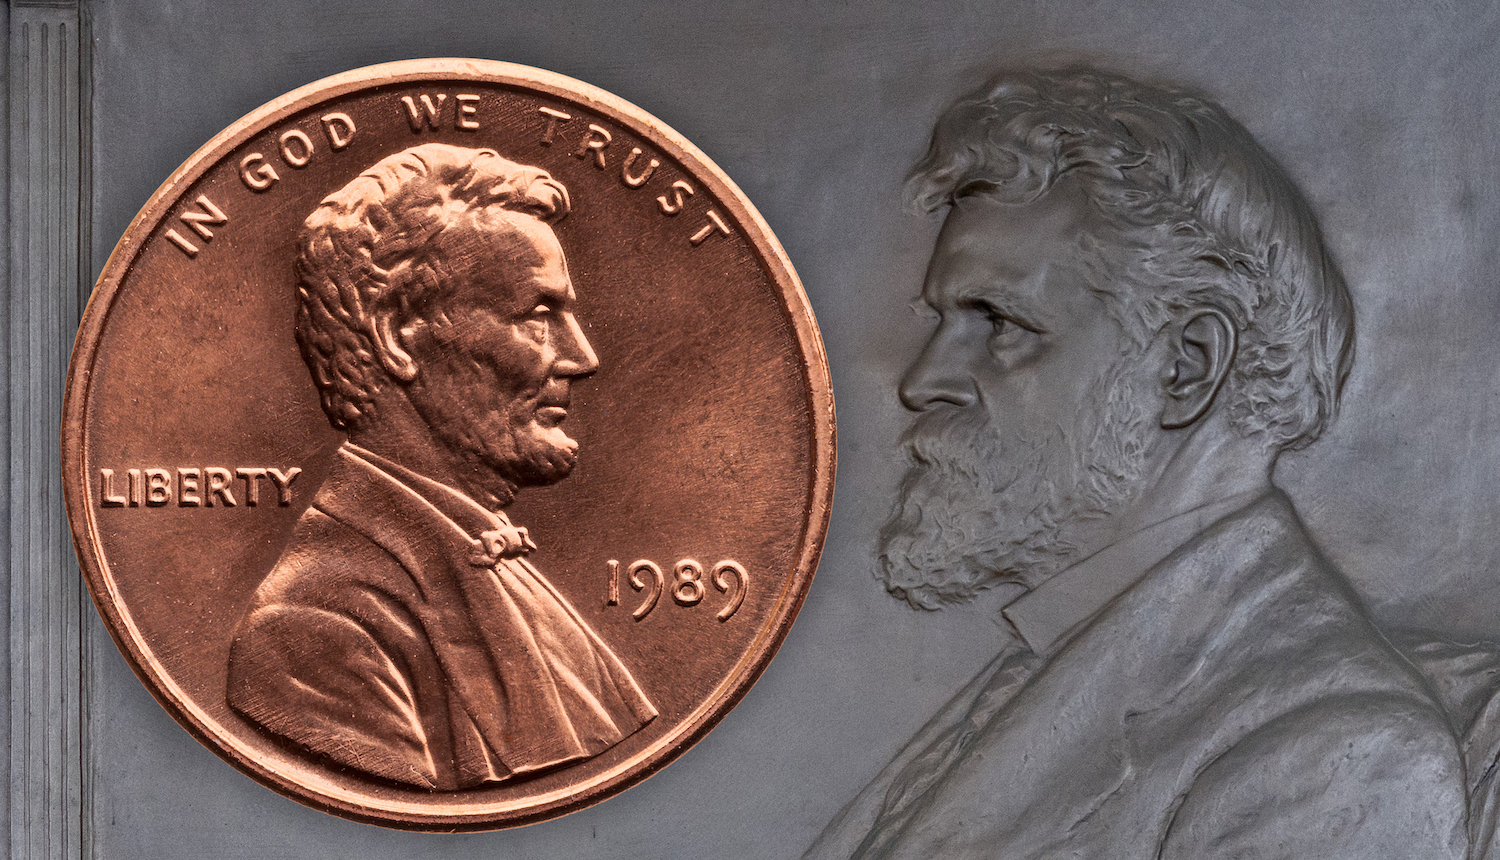 The wall-mounted relief of Swasey is done by Victor David Brenner, the same artist responsible for the Abraham Lincoln penny.